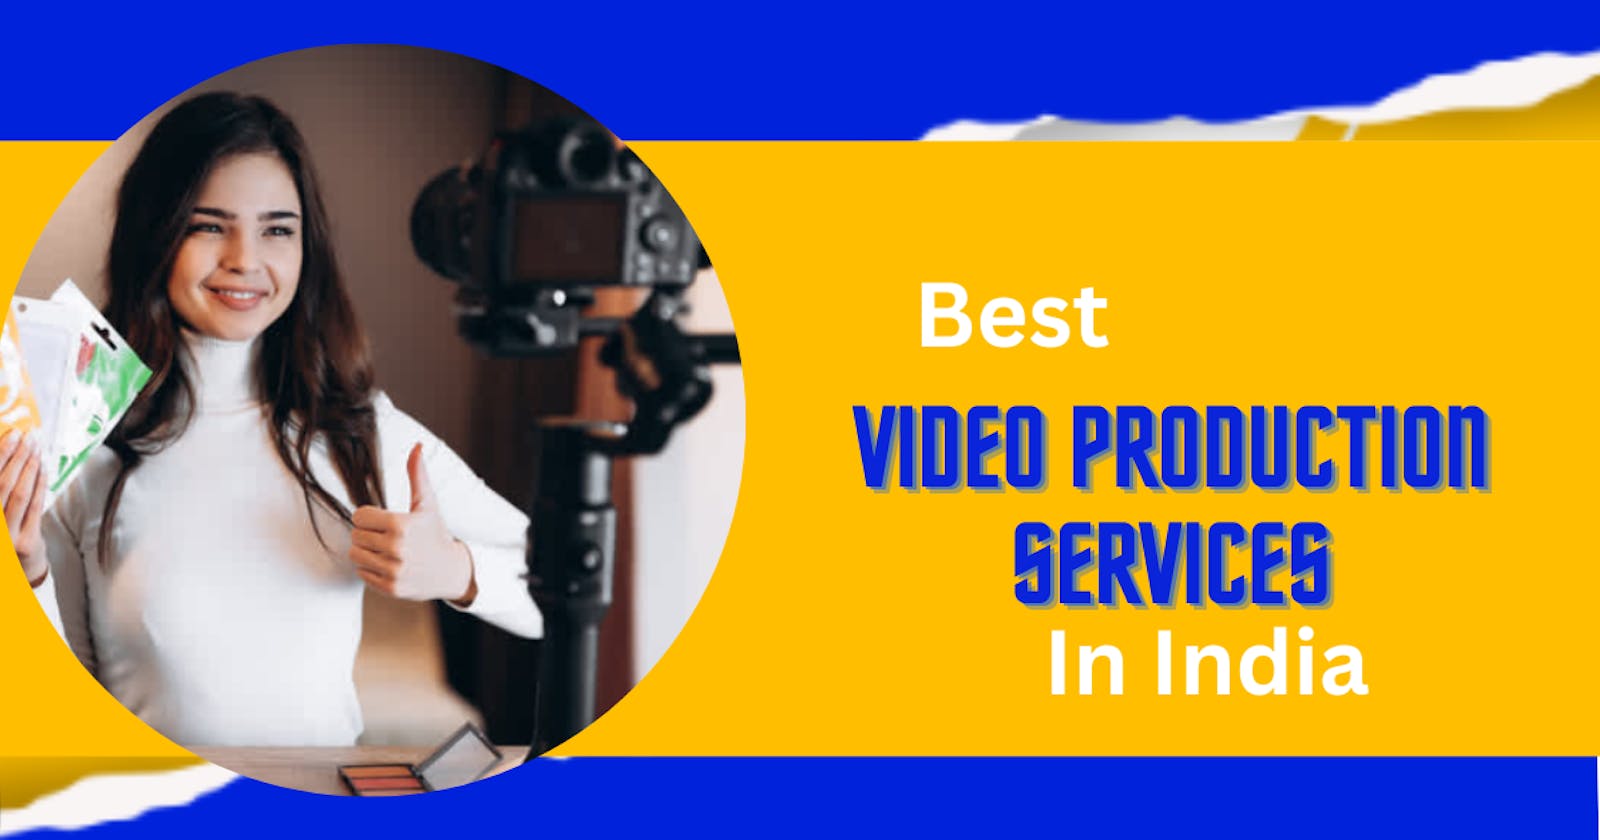 Best Video Production Services in India